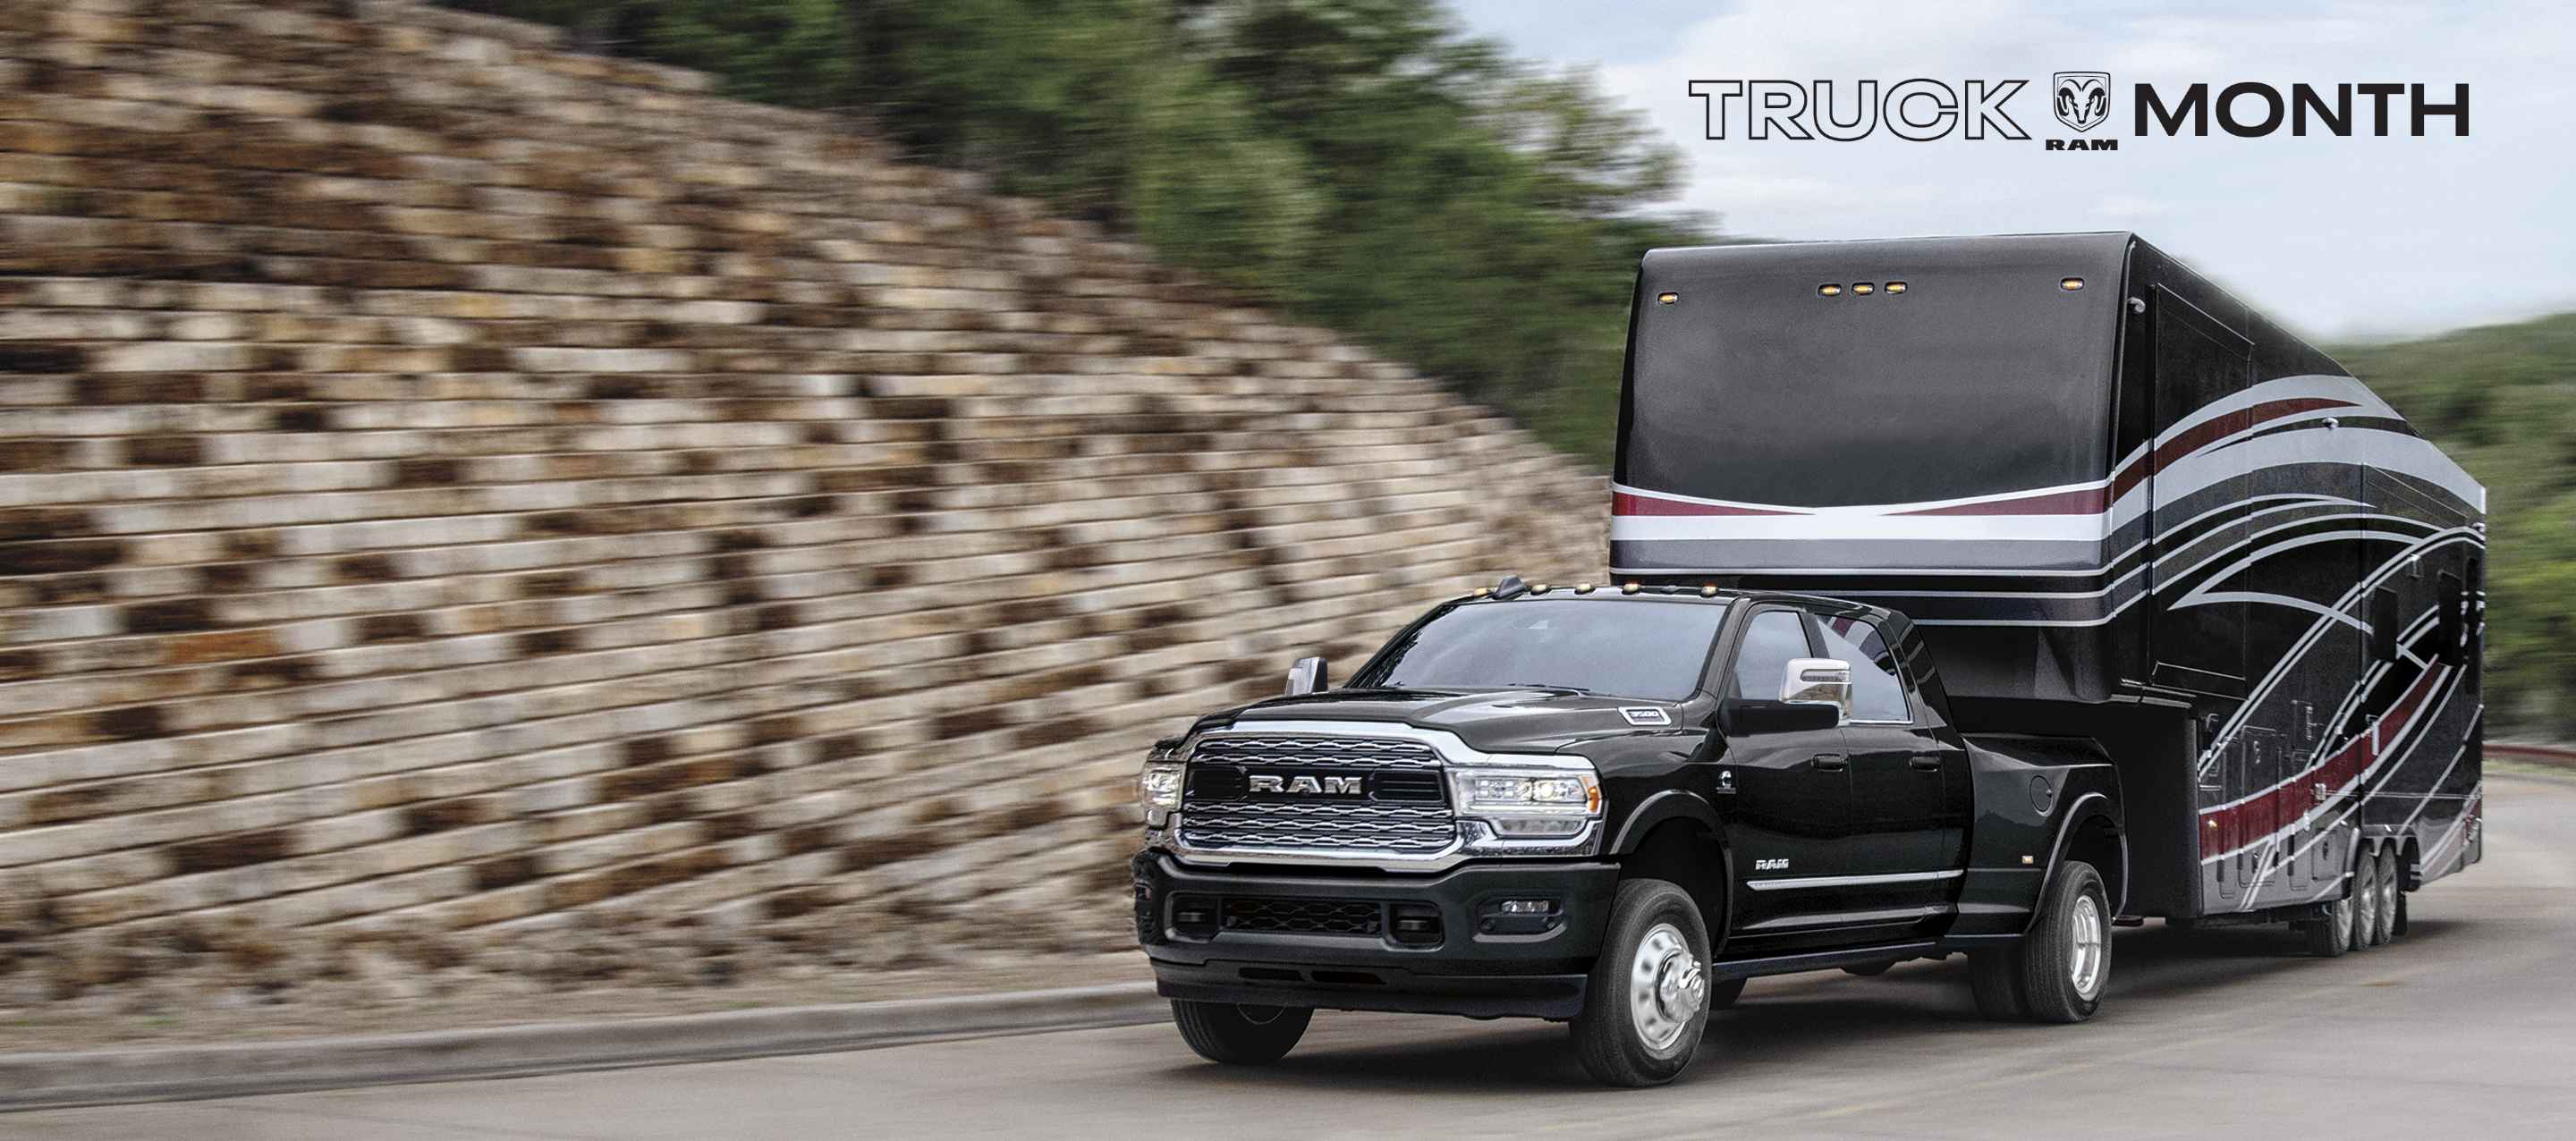 A black 2024 Ram 3500 Limited 4x4 Mega Cab towing a large fifth wheel travel trailer. The background is blurred to indicate the vehicle is in motion. Ram Truck Month.